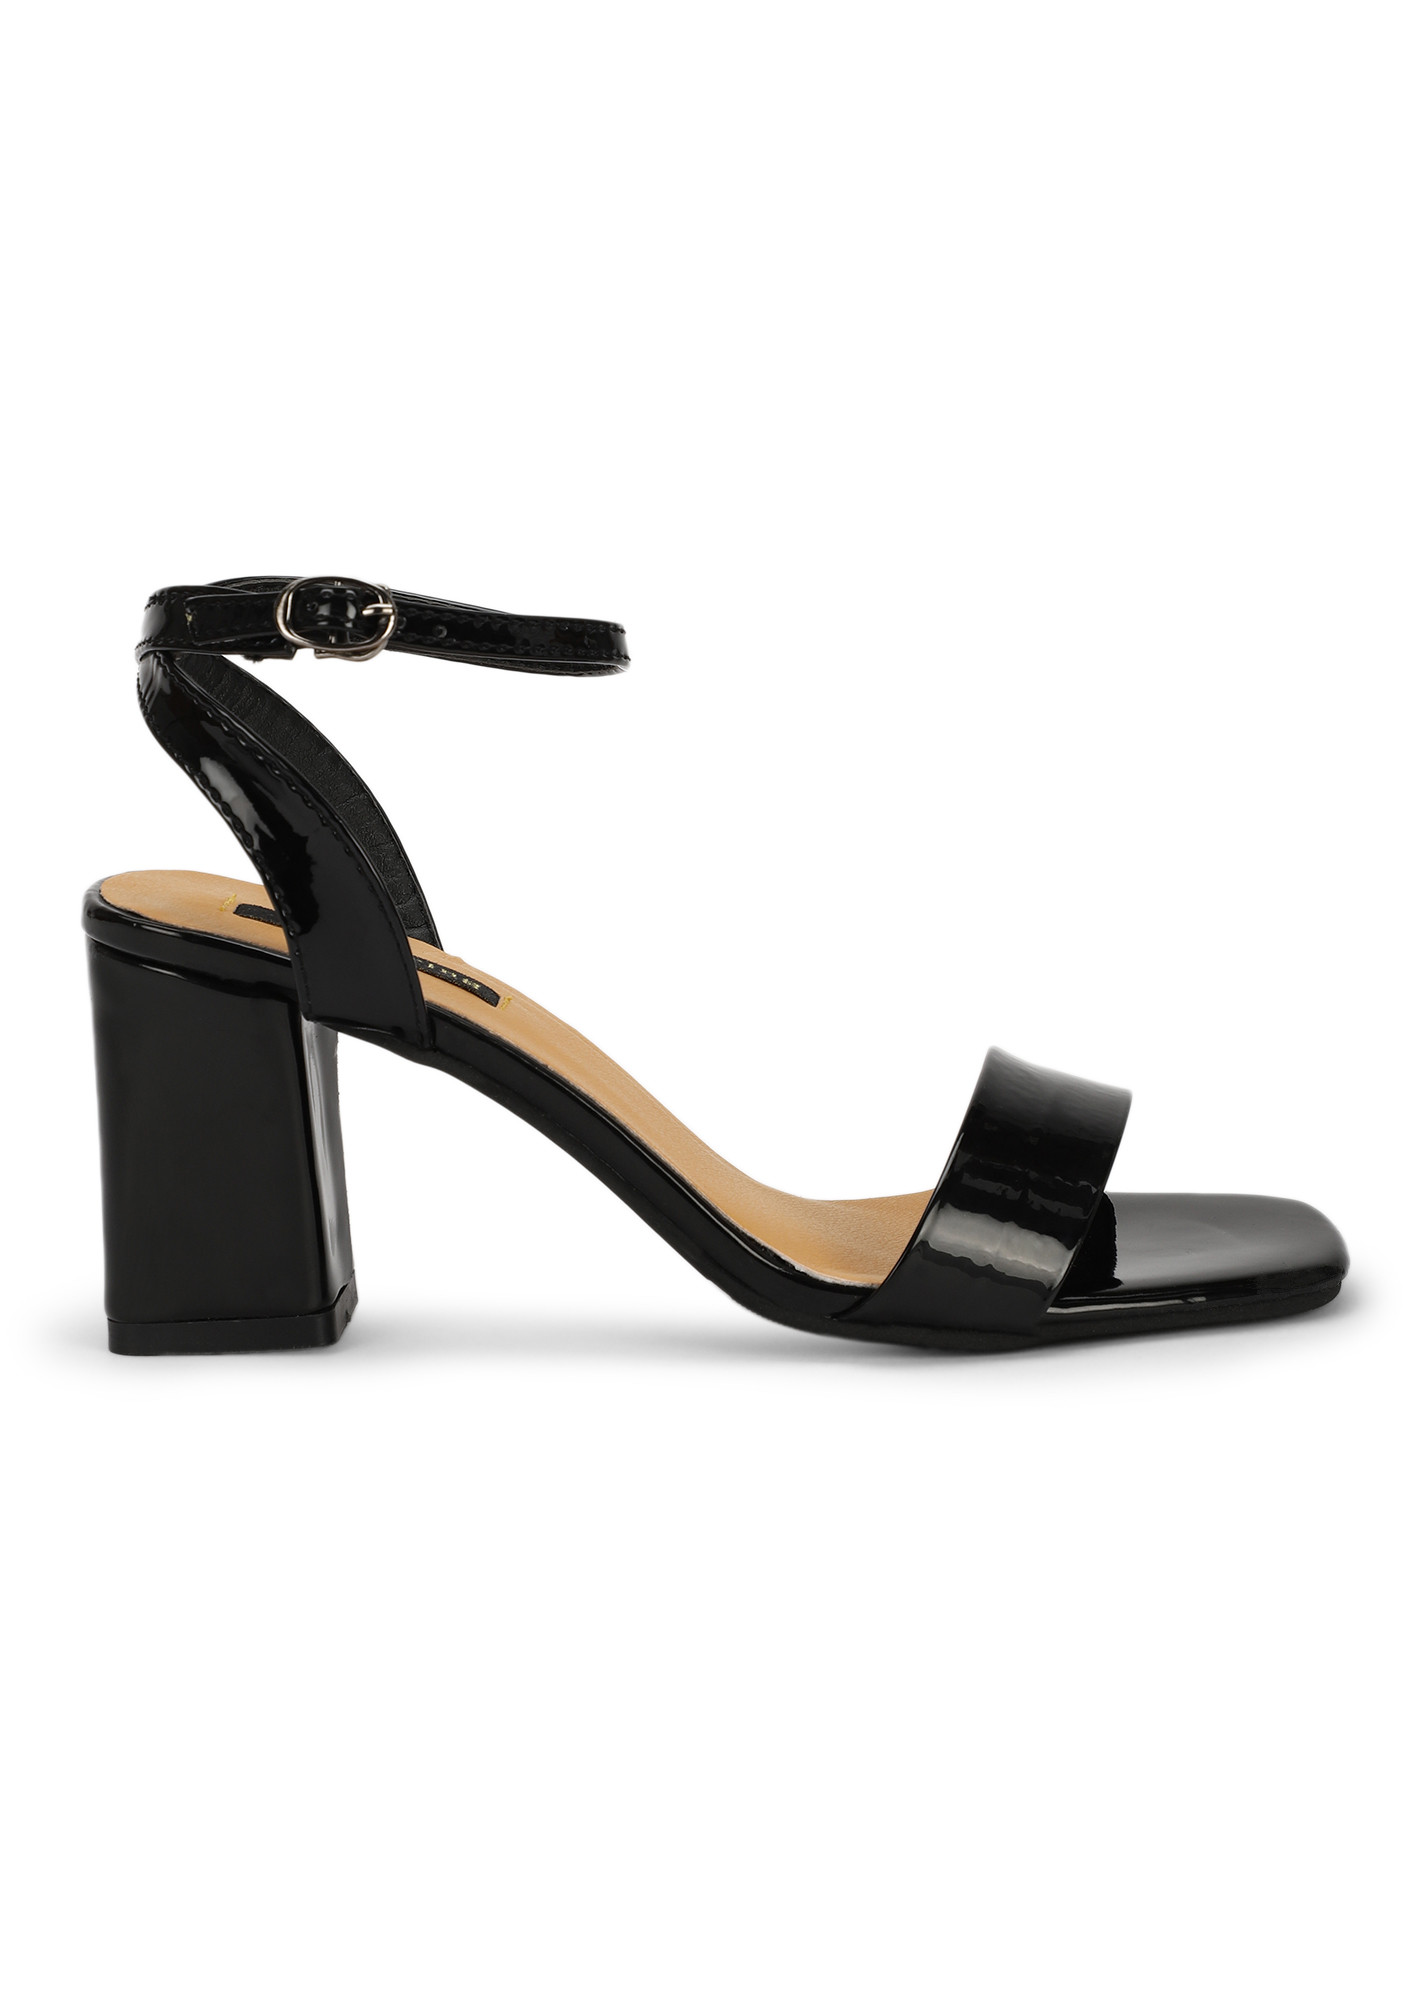 WALK ON BY THE AVENUE BLACK HEELED SANDALS